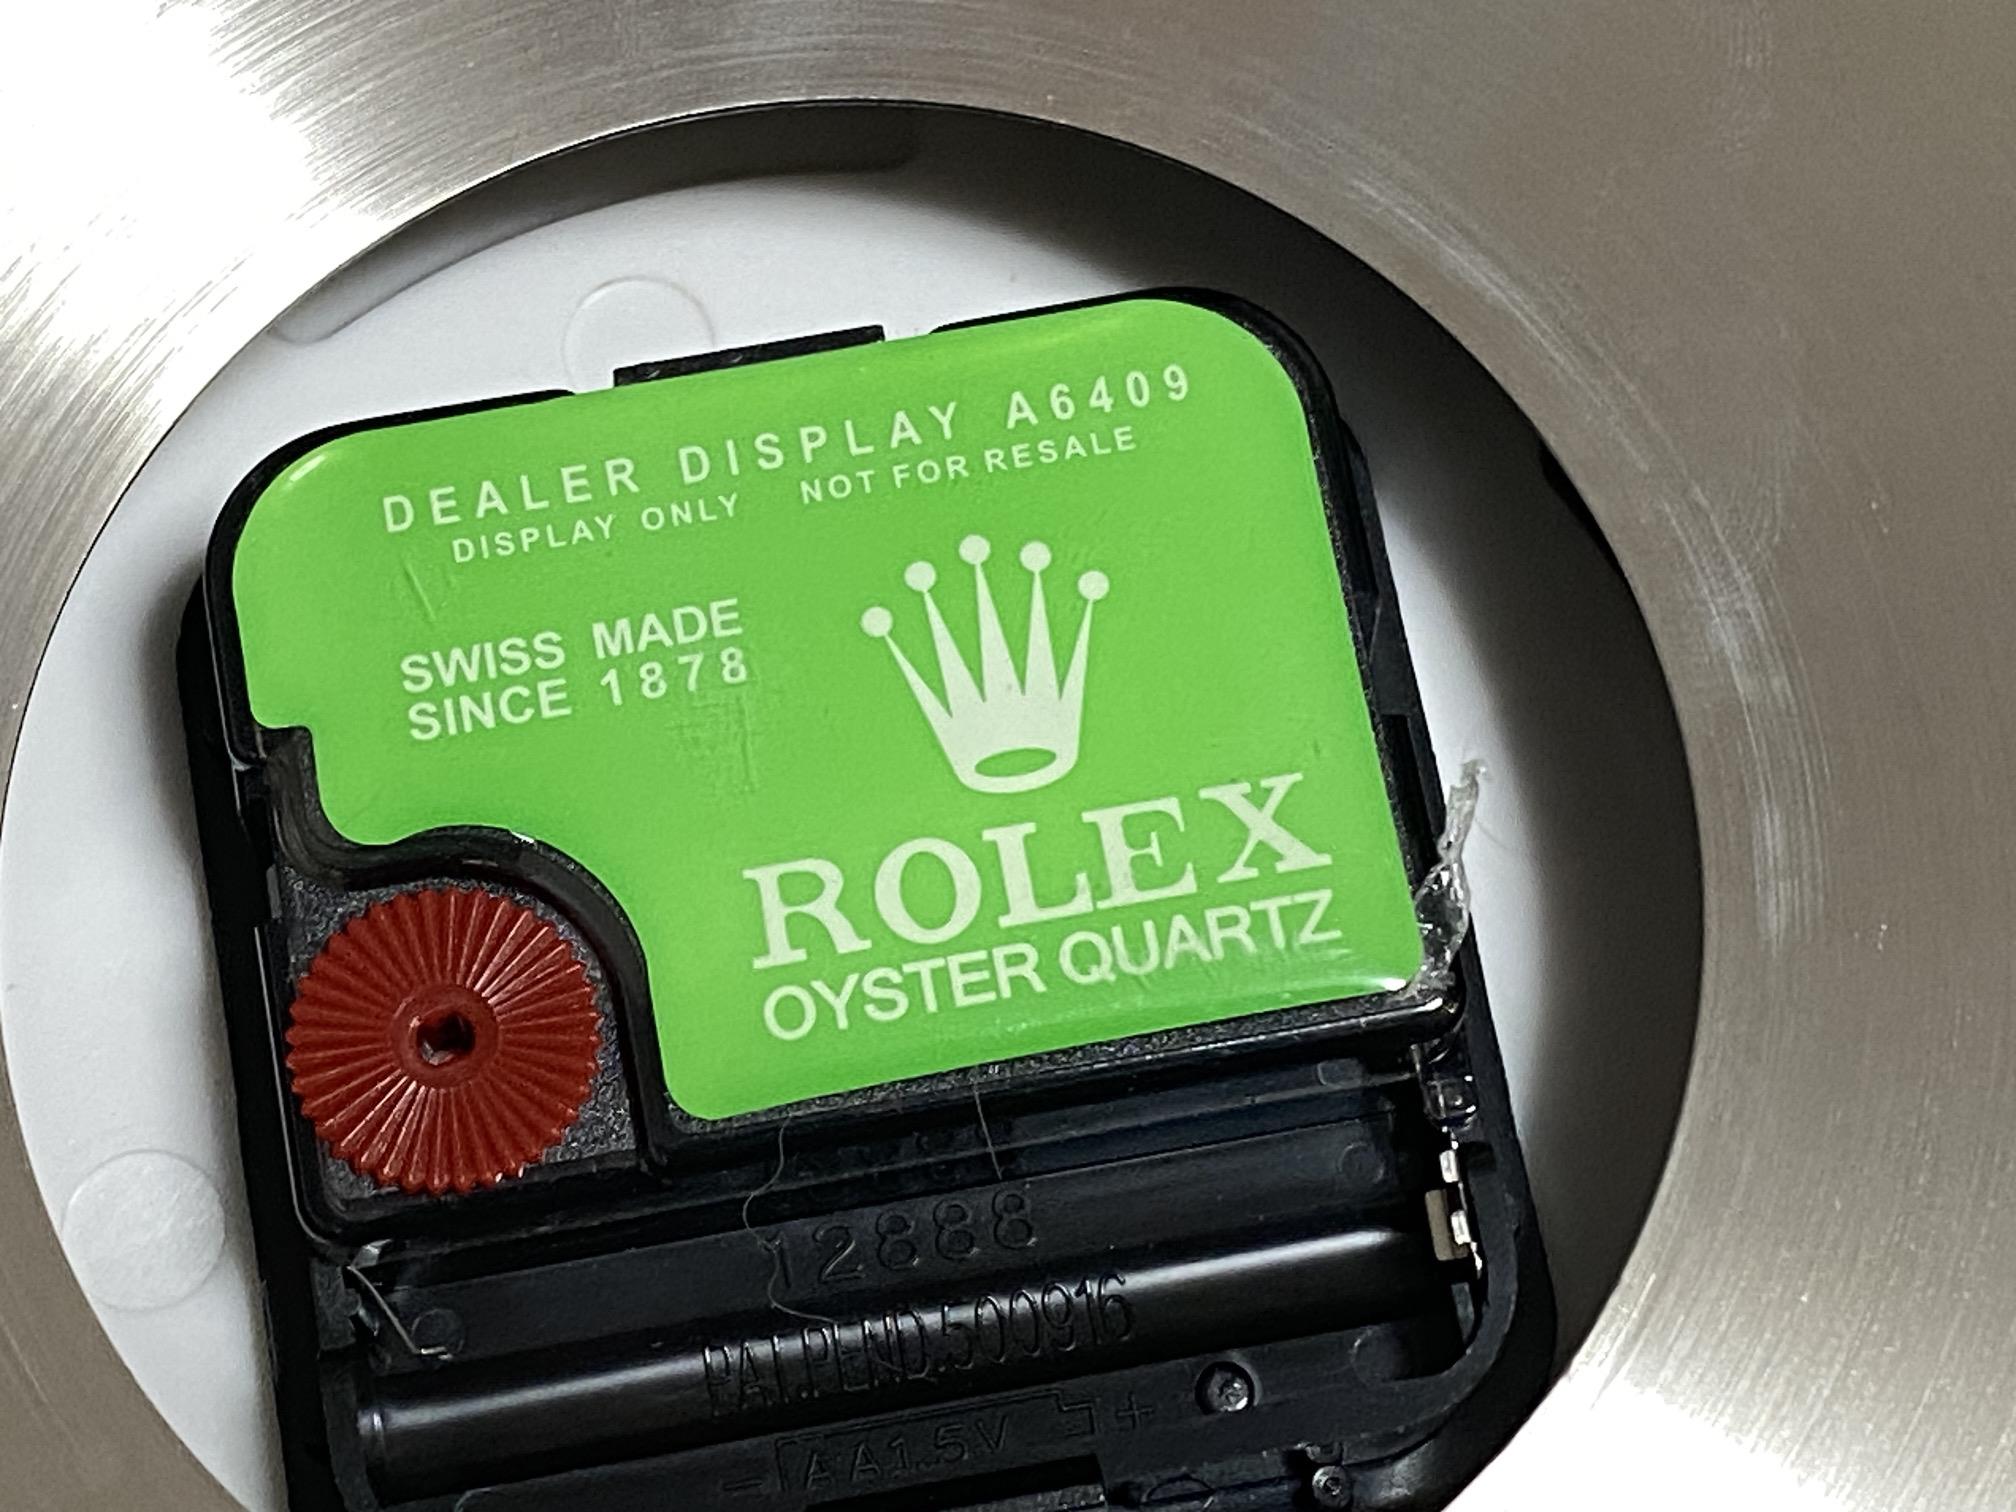 WALL CLOCK DEPICTING ROLEX - Image 3 of 3